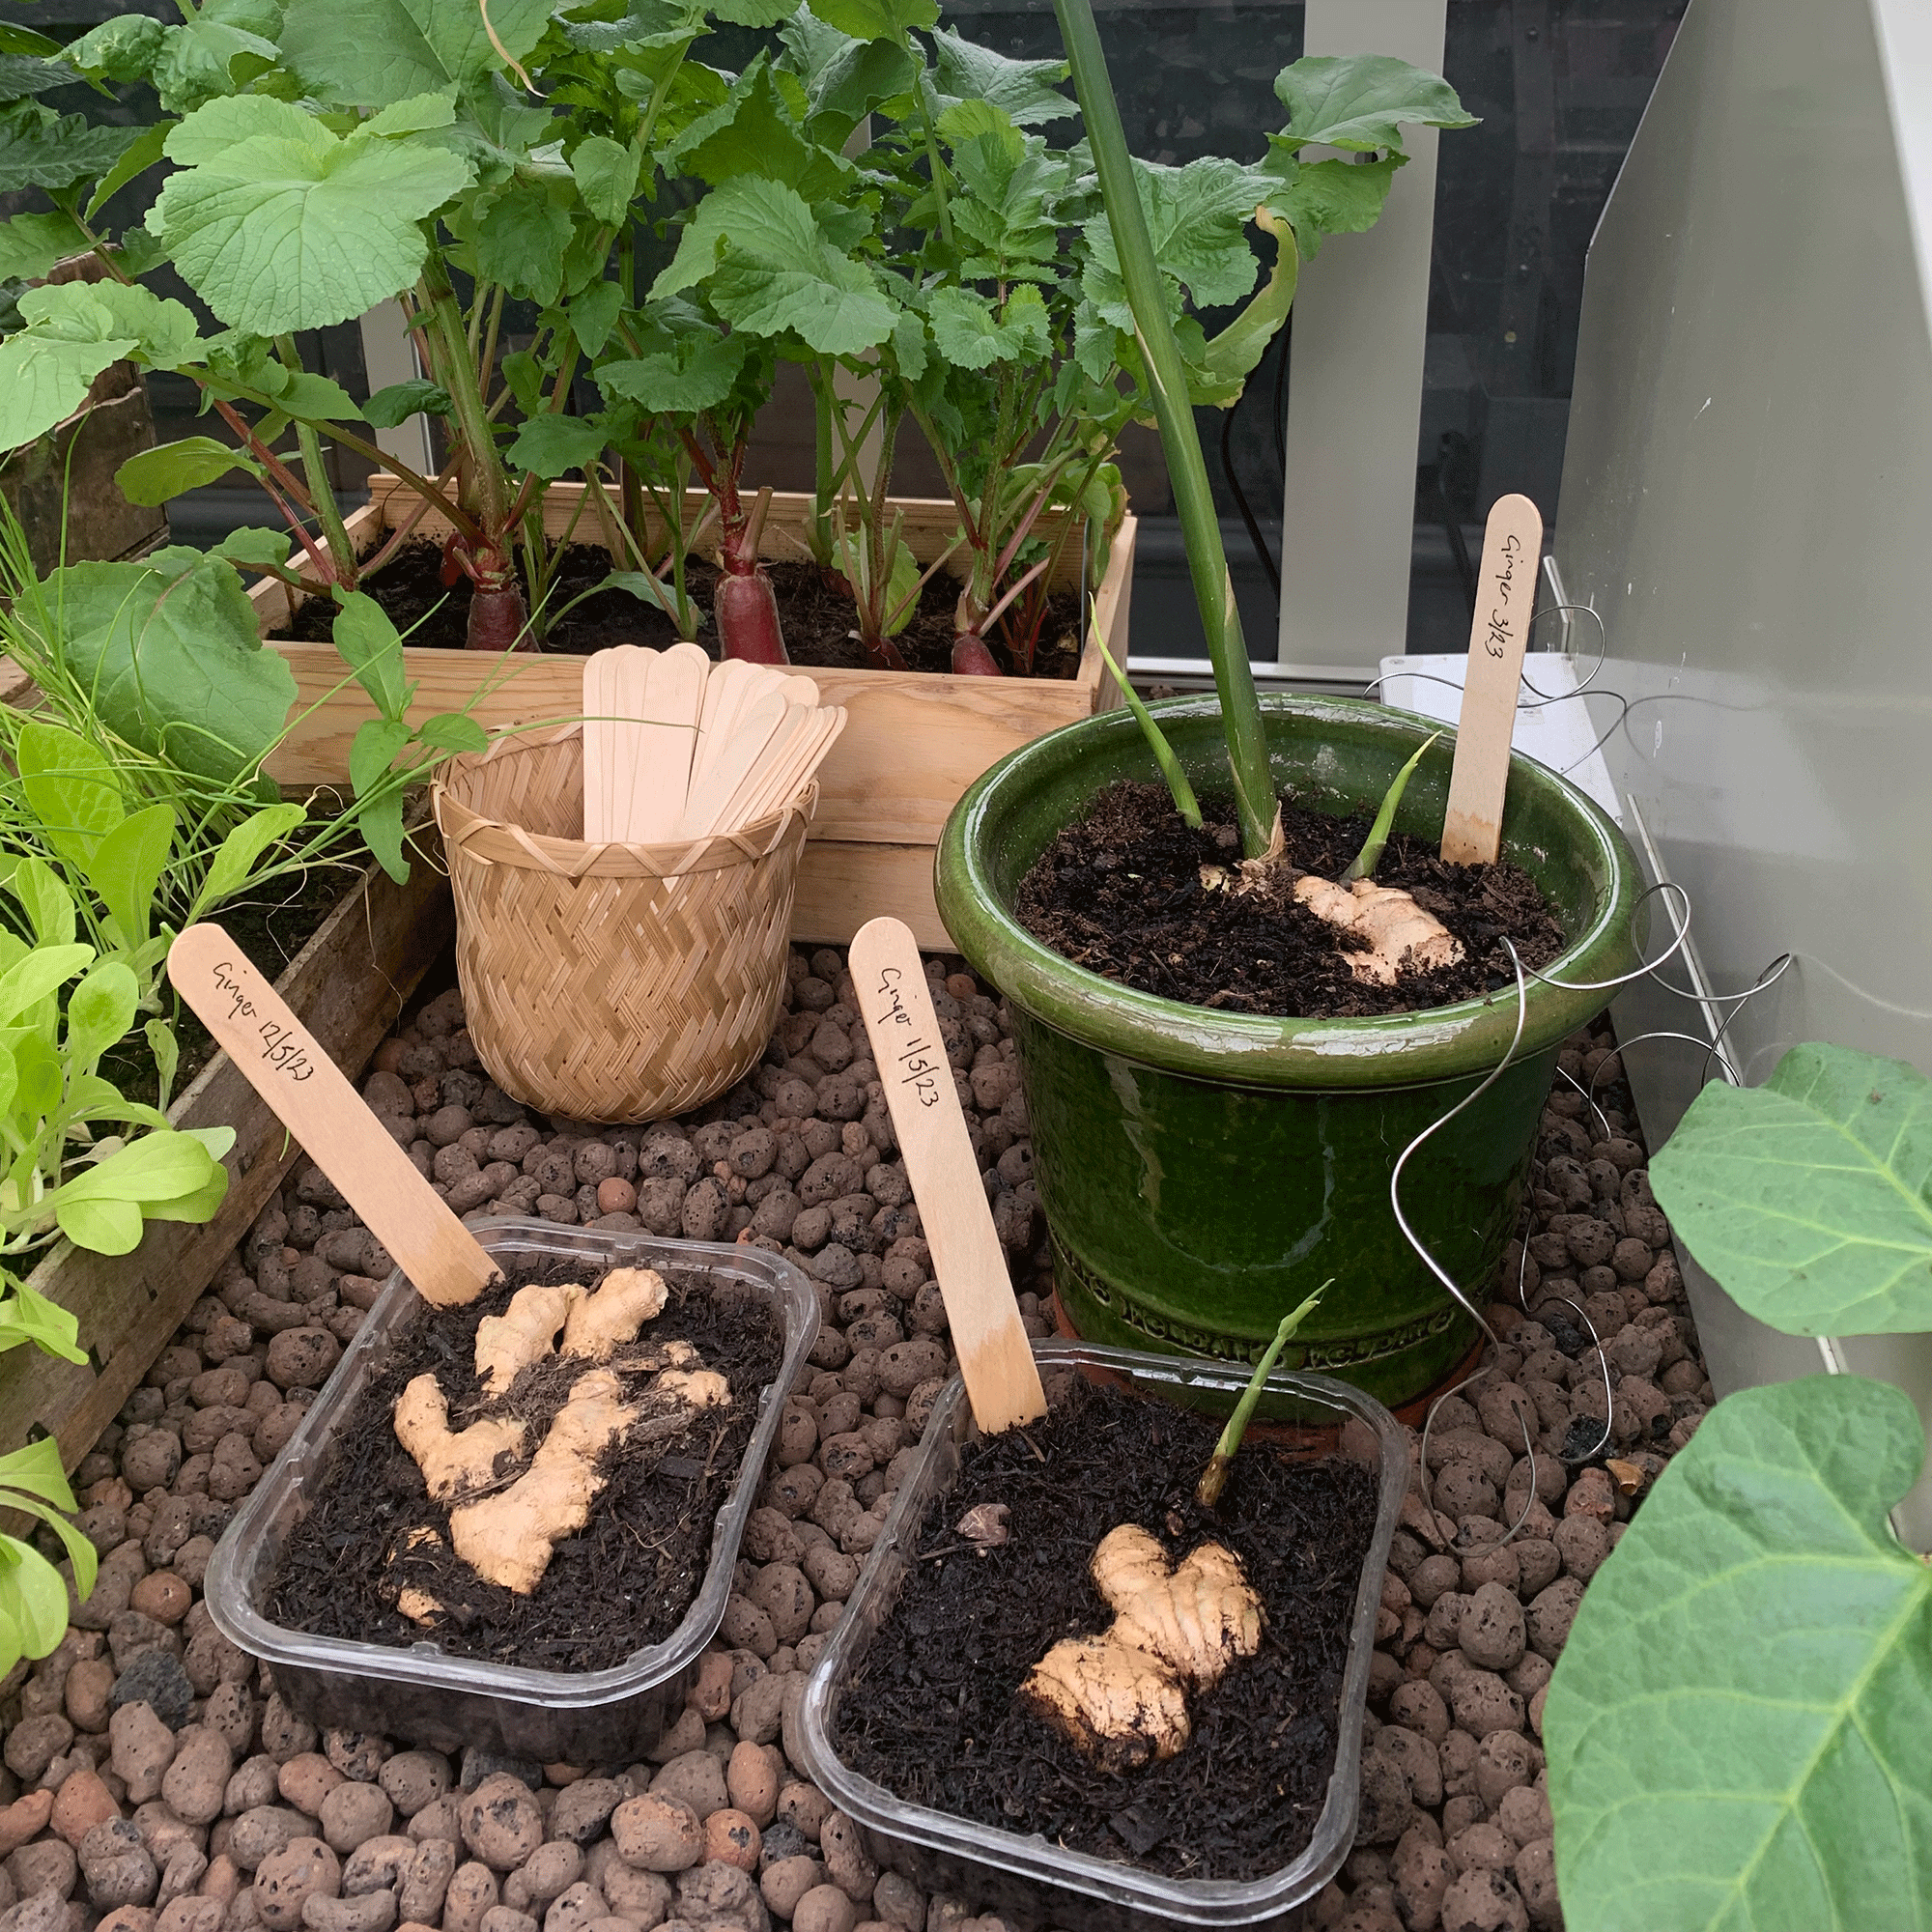 How to grow ginger from shop-bought - 6 steps towards a bountiful plant